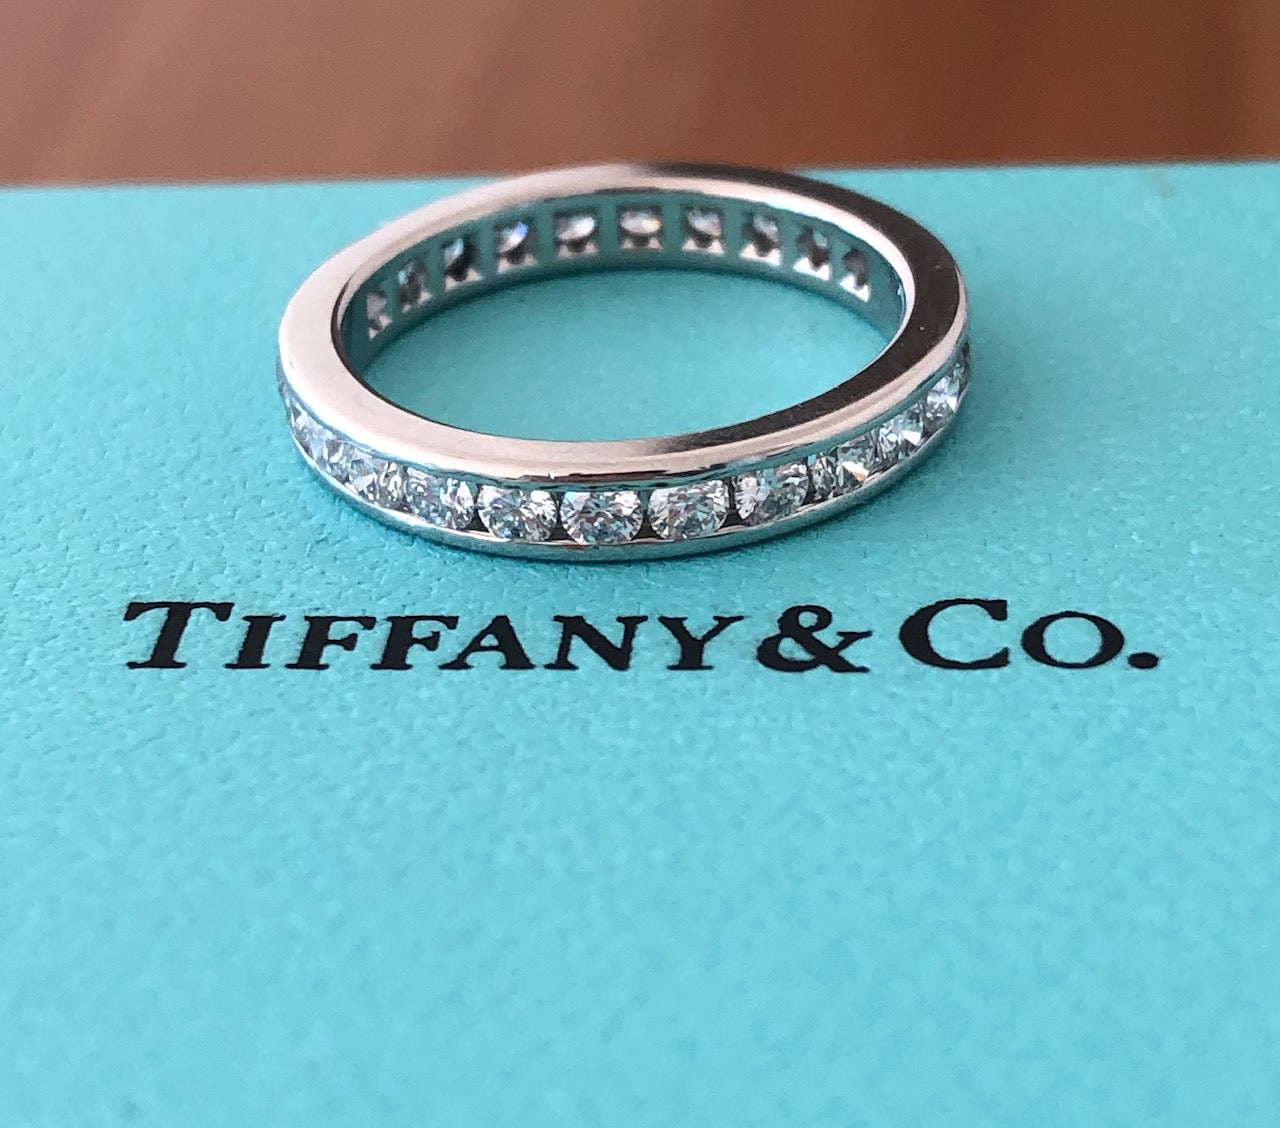 Tiffany & Co. 0.93tcw Diamond Full Eternity Band Size 5 Val/Boxes RRP $8200